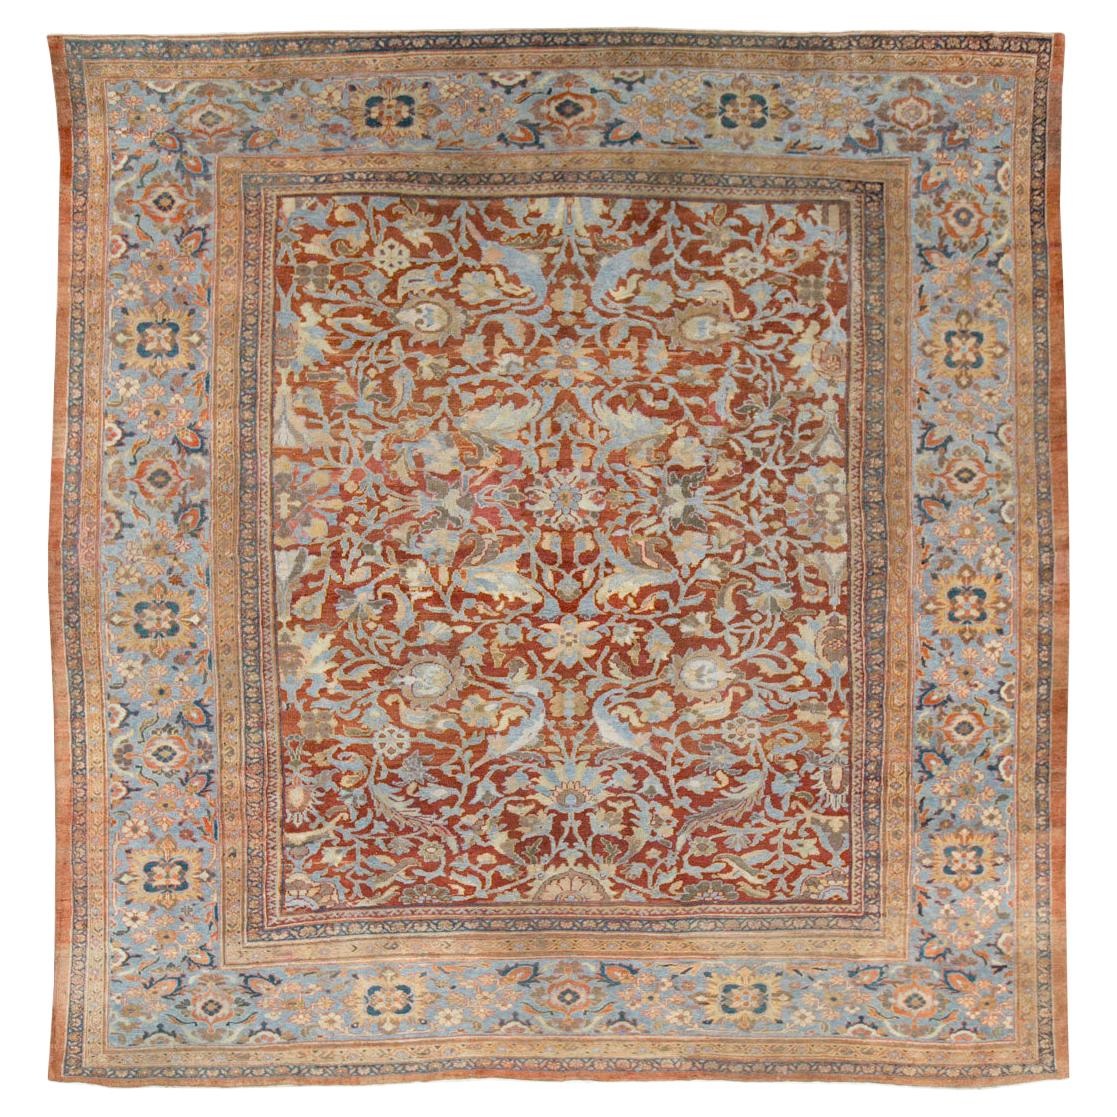 Early 20th Century Handmade Persian Sultanabad Large Square Room Size Carpet For Sale